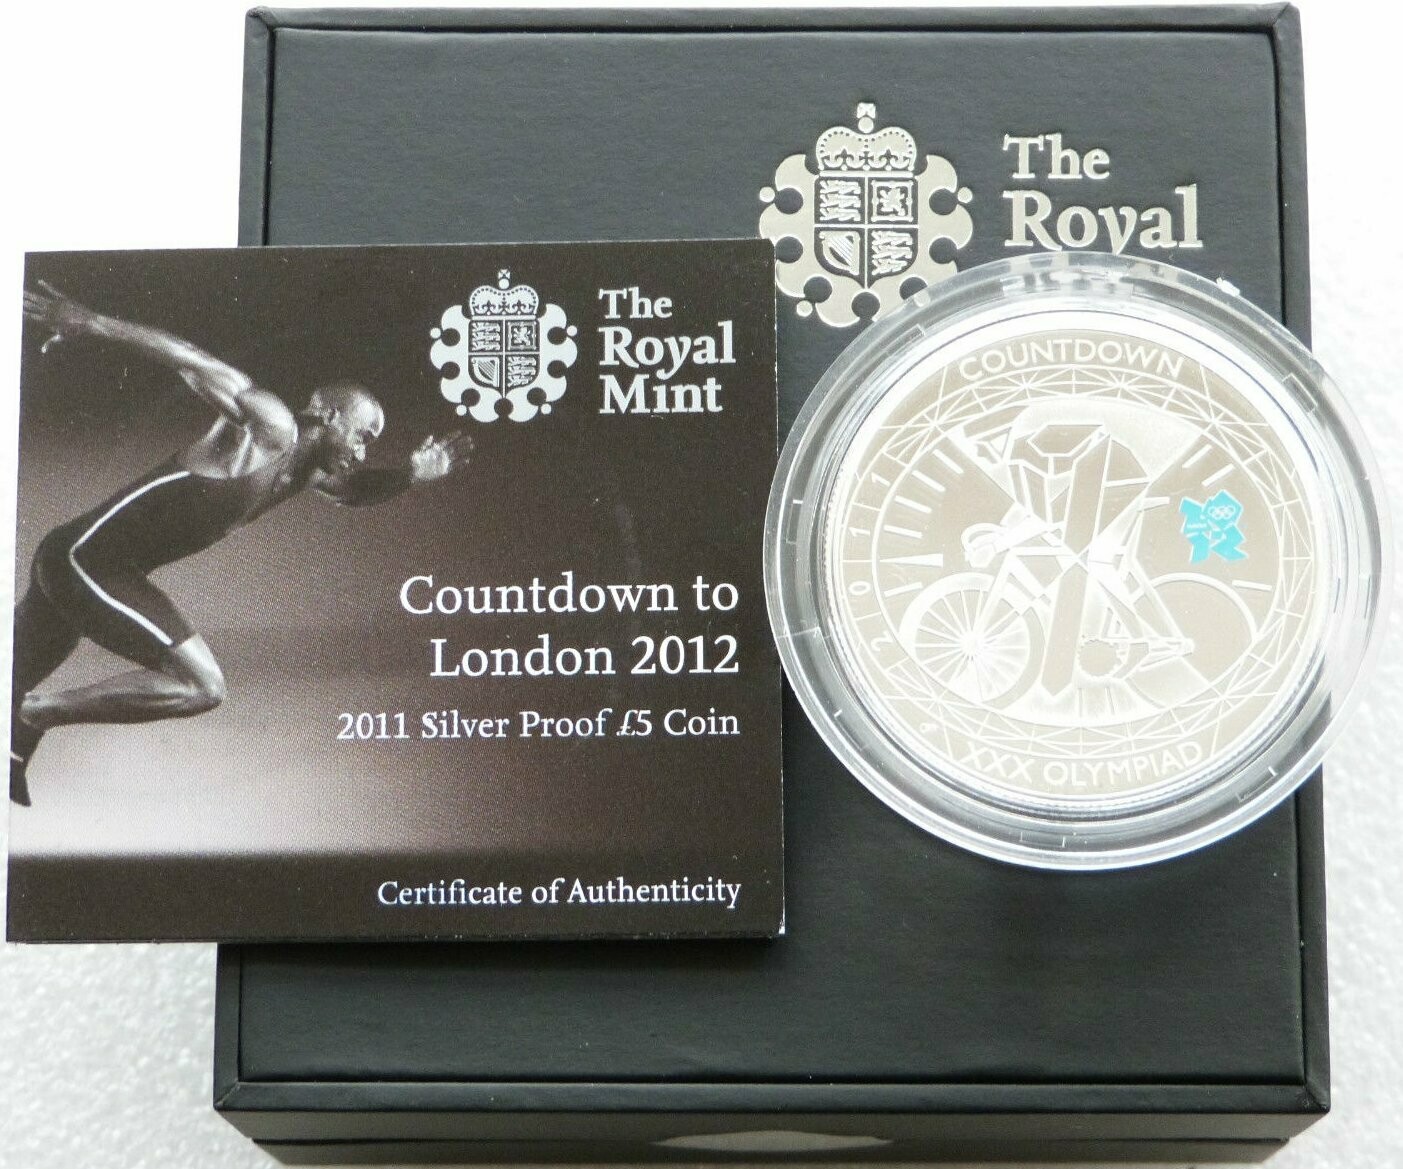 London 2012 Olympic £5 Silver Piedfort Coin Royal Mint Paralympic Countdown 2011 